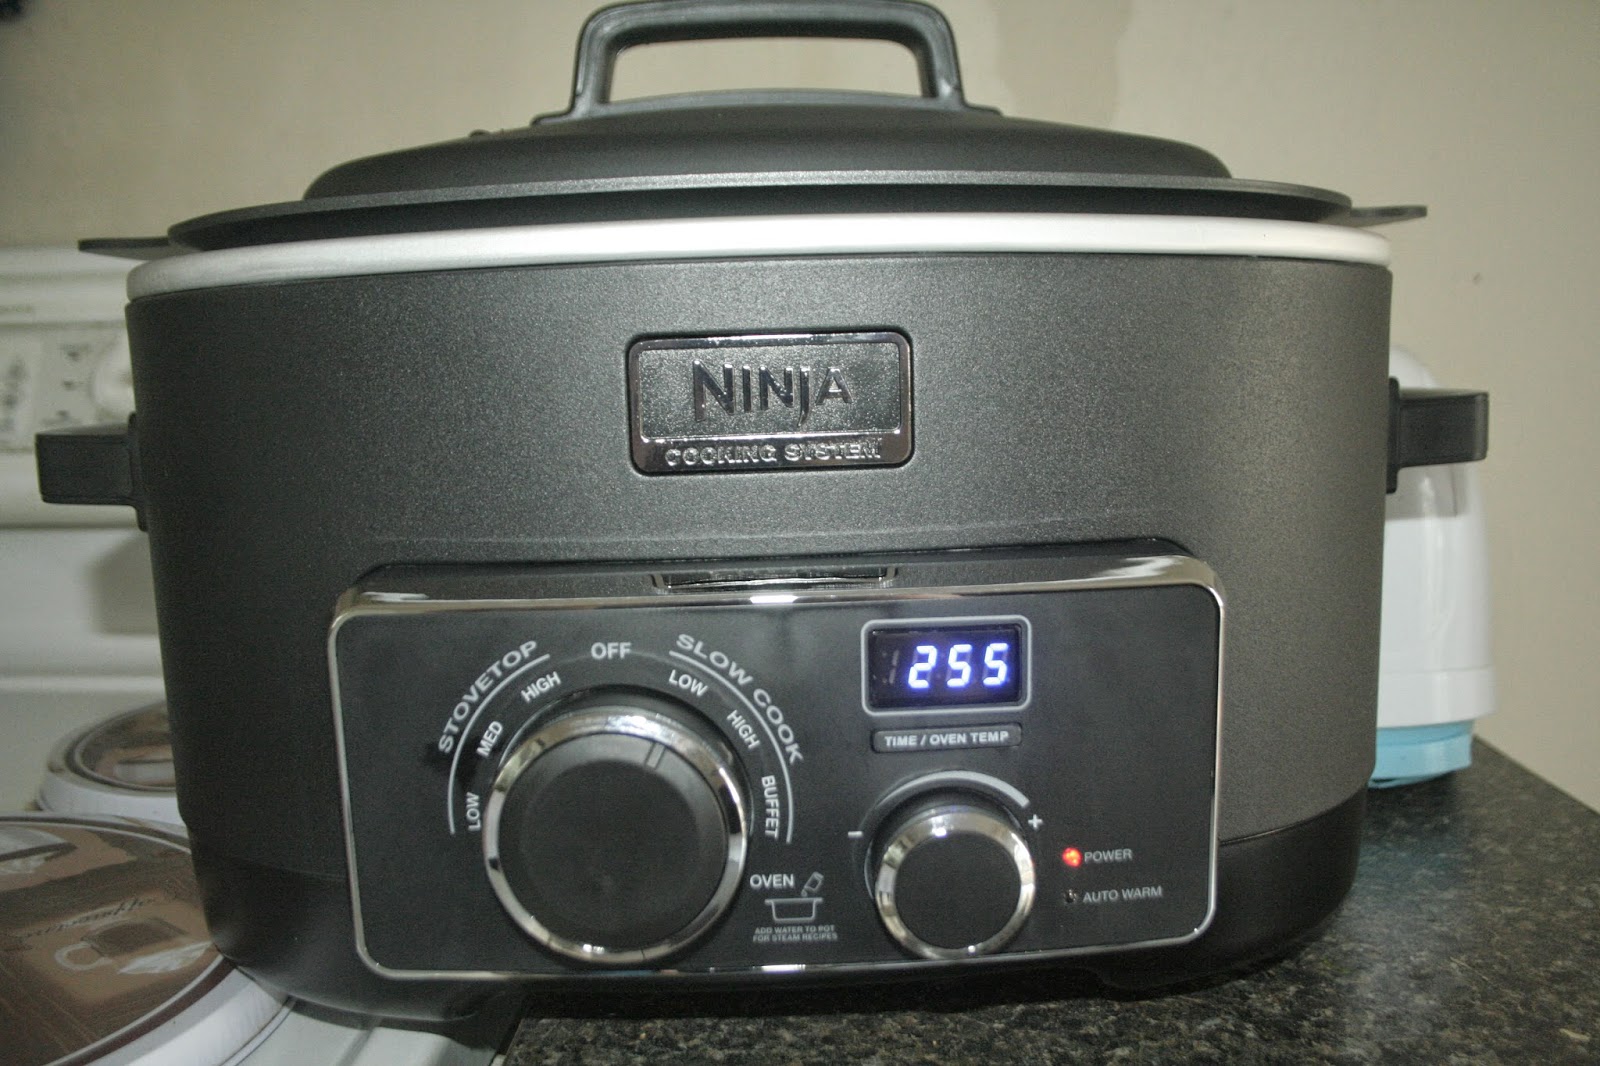 7 Kids and Us: New Ninja 3 in 1 Cooking System Review